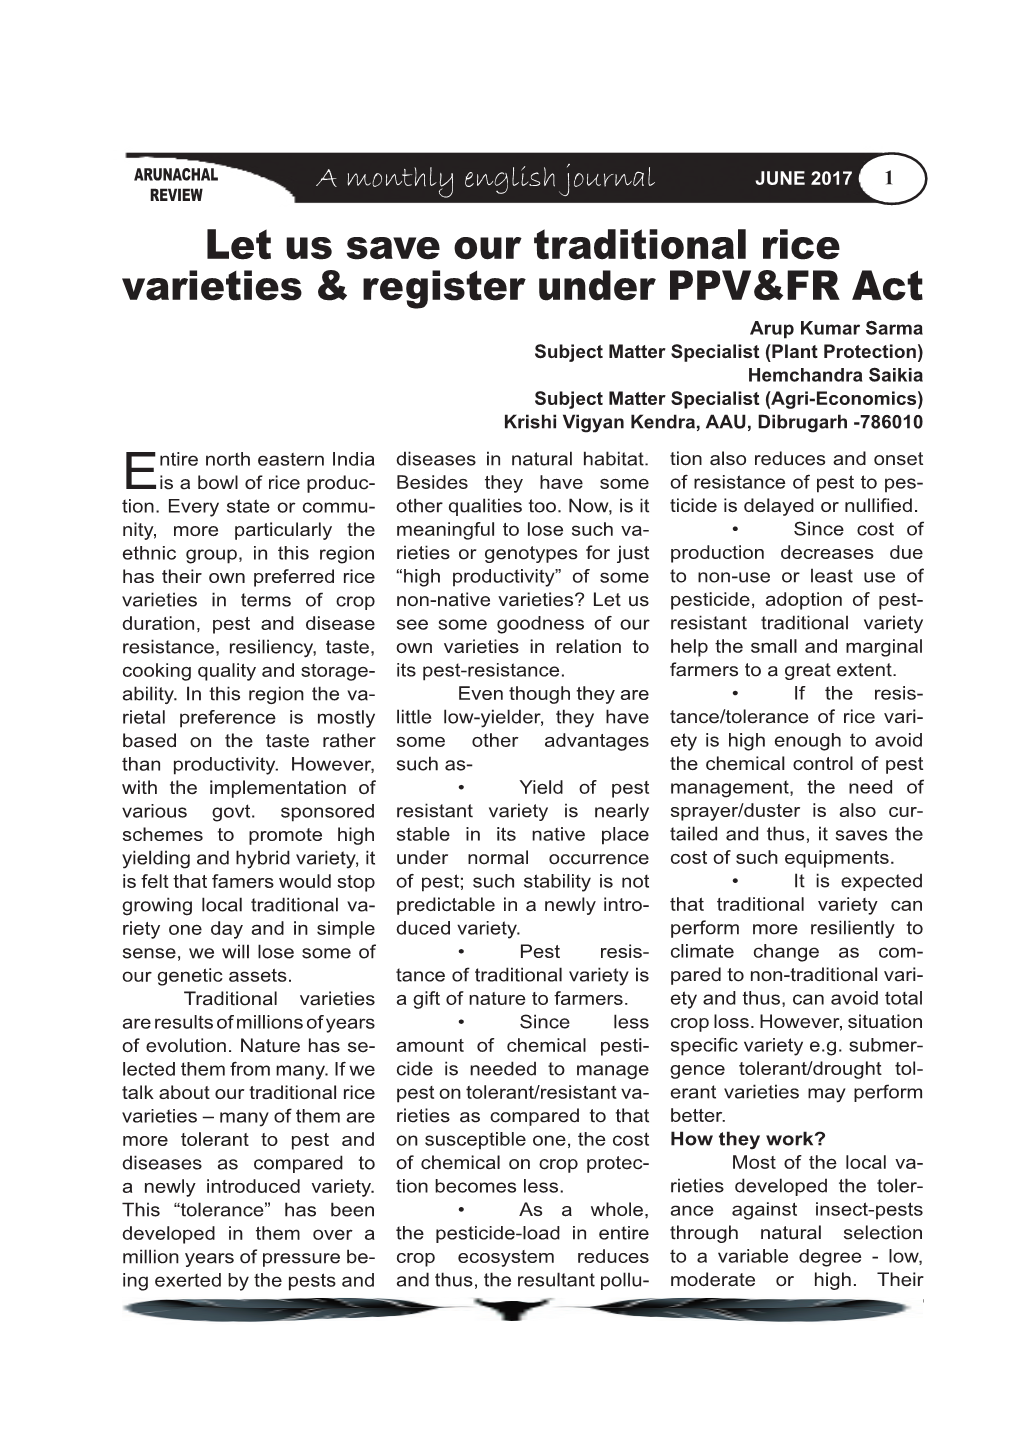 Let Us Save Our Traditional Rice Varieties & Register Under PPV&FR